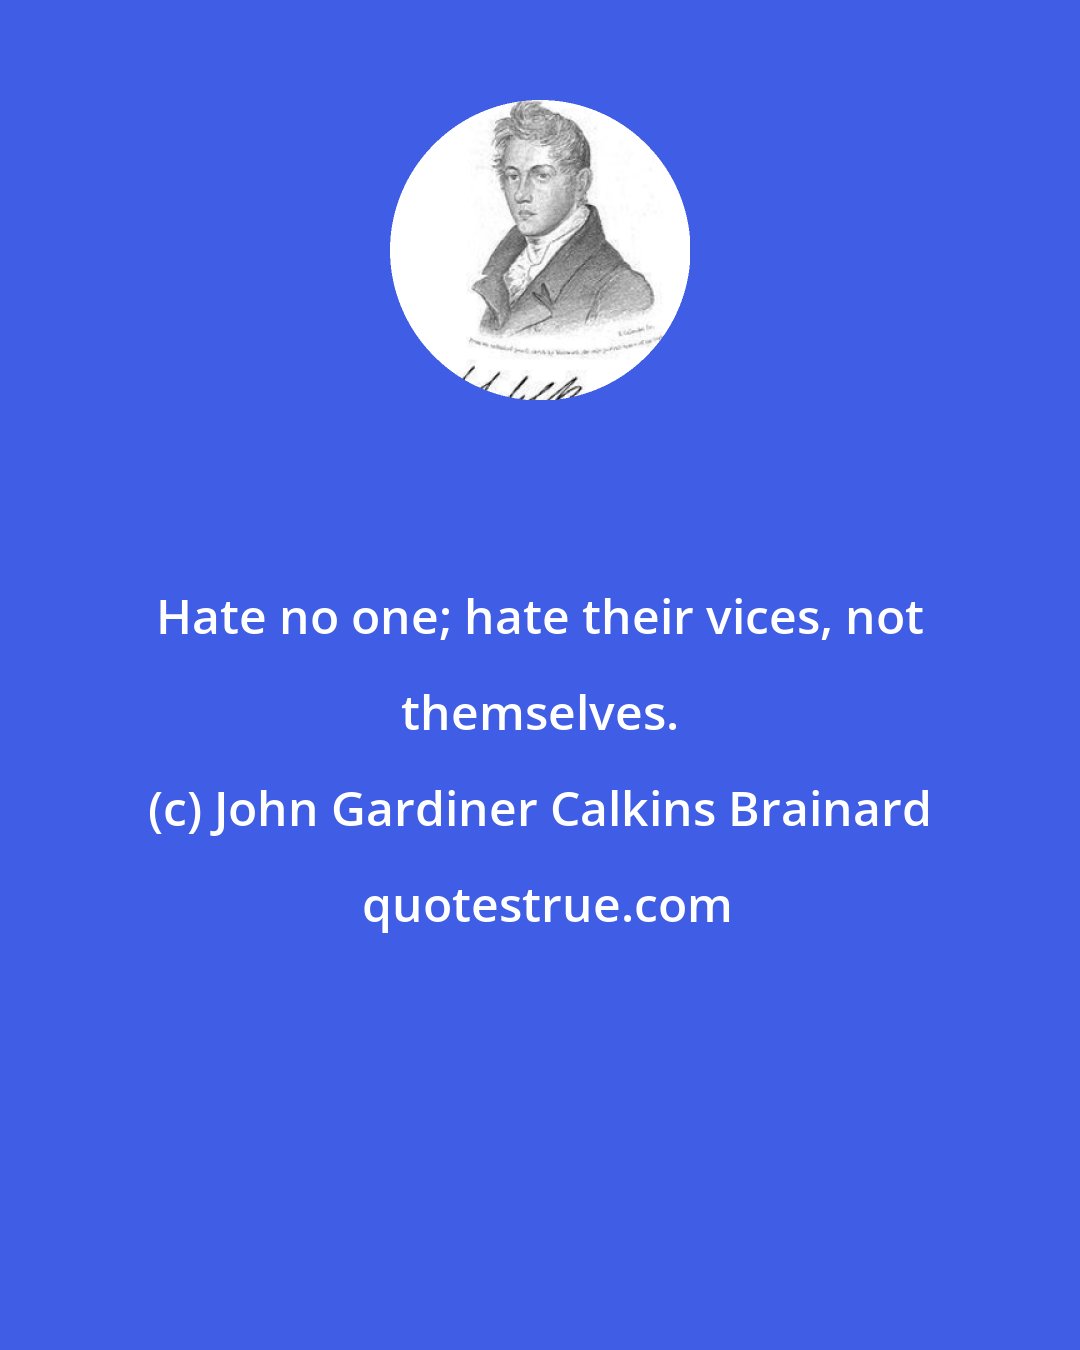 John Gardiner Calkins Brainard: Hate no one; hate their vices, not themselves.